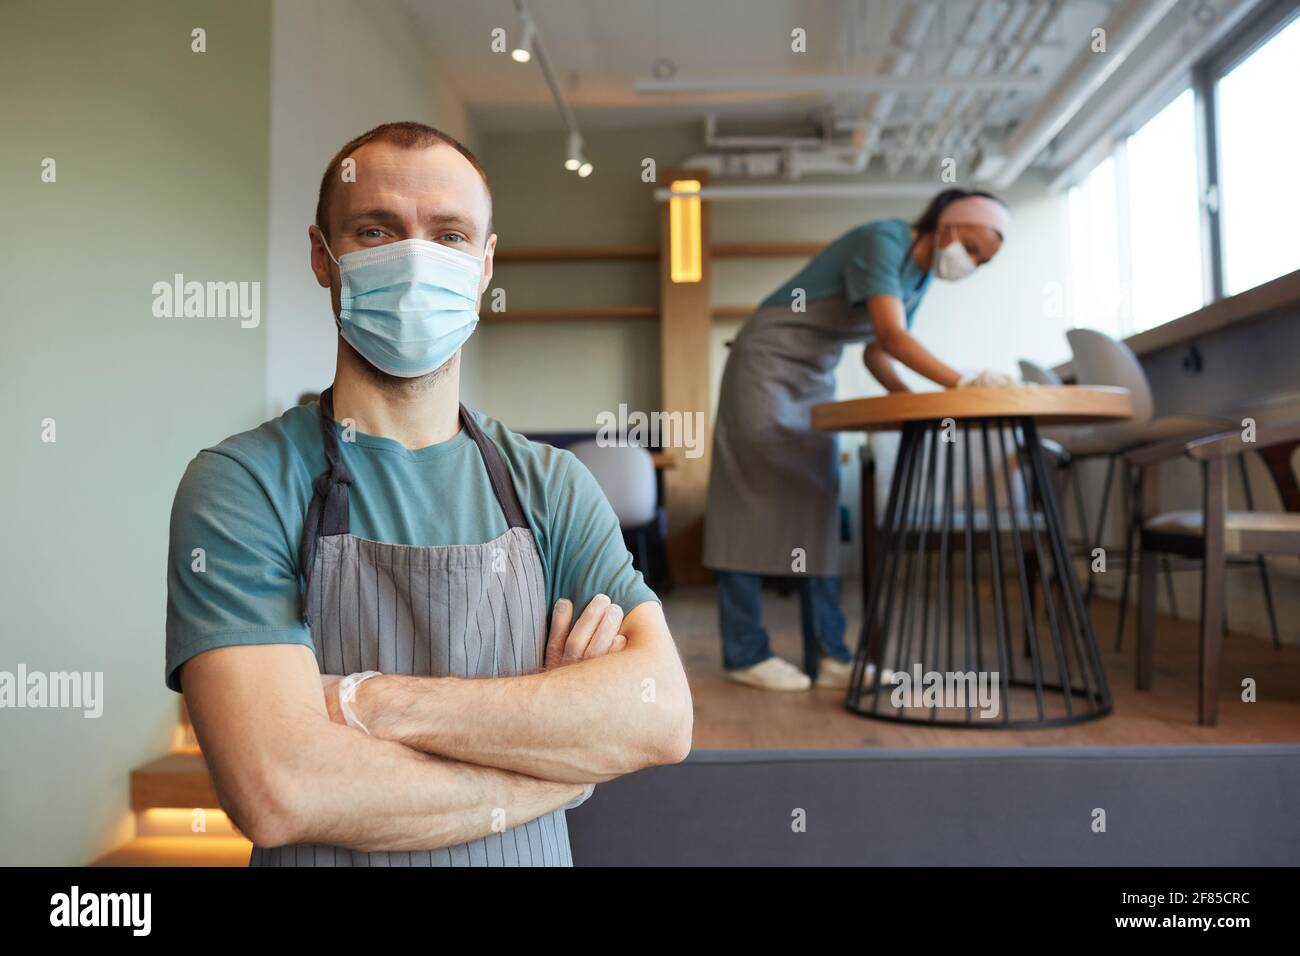 Waist up portrait of young male waiter wearing mask and apron looking at camera while standing in cafe with woman cleaning in background, covid safety Stock Photo